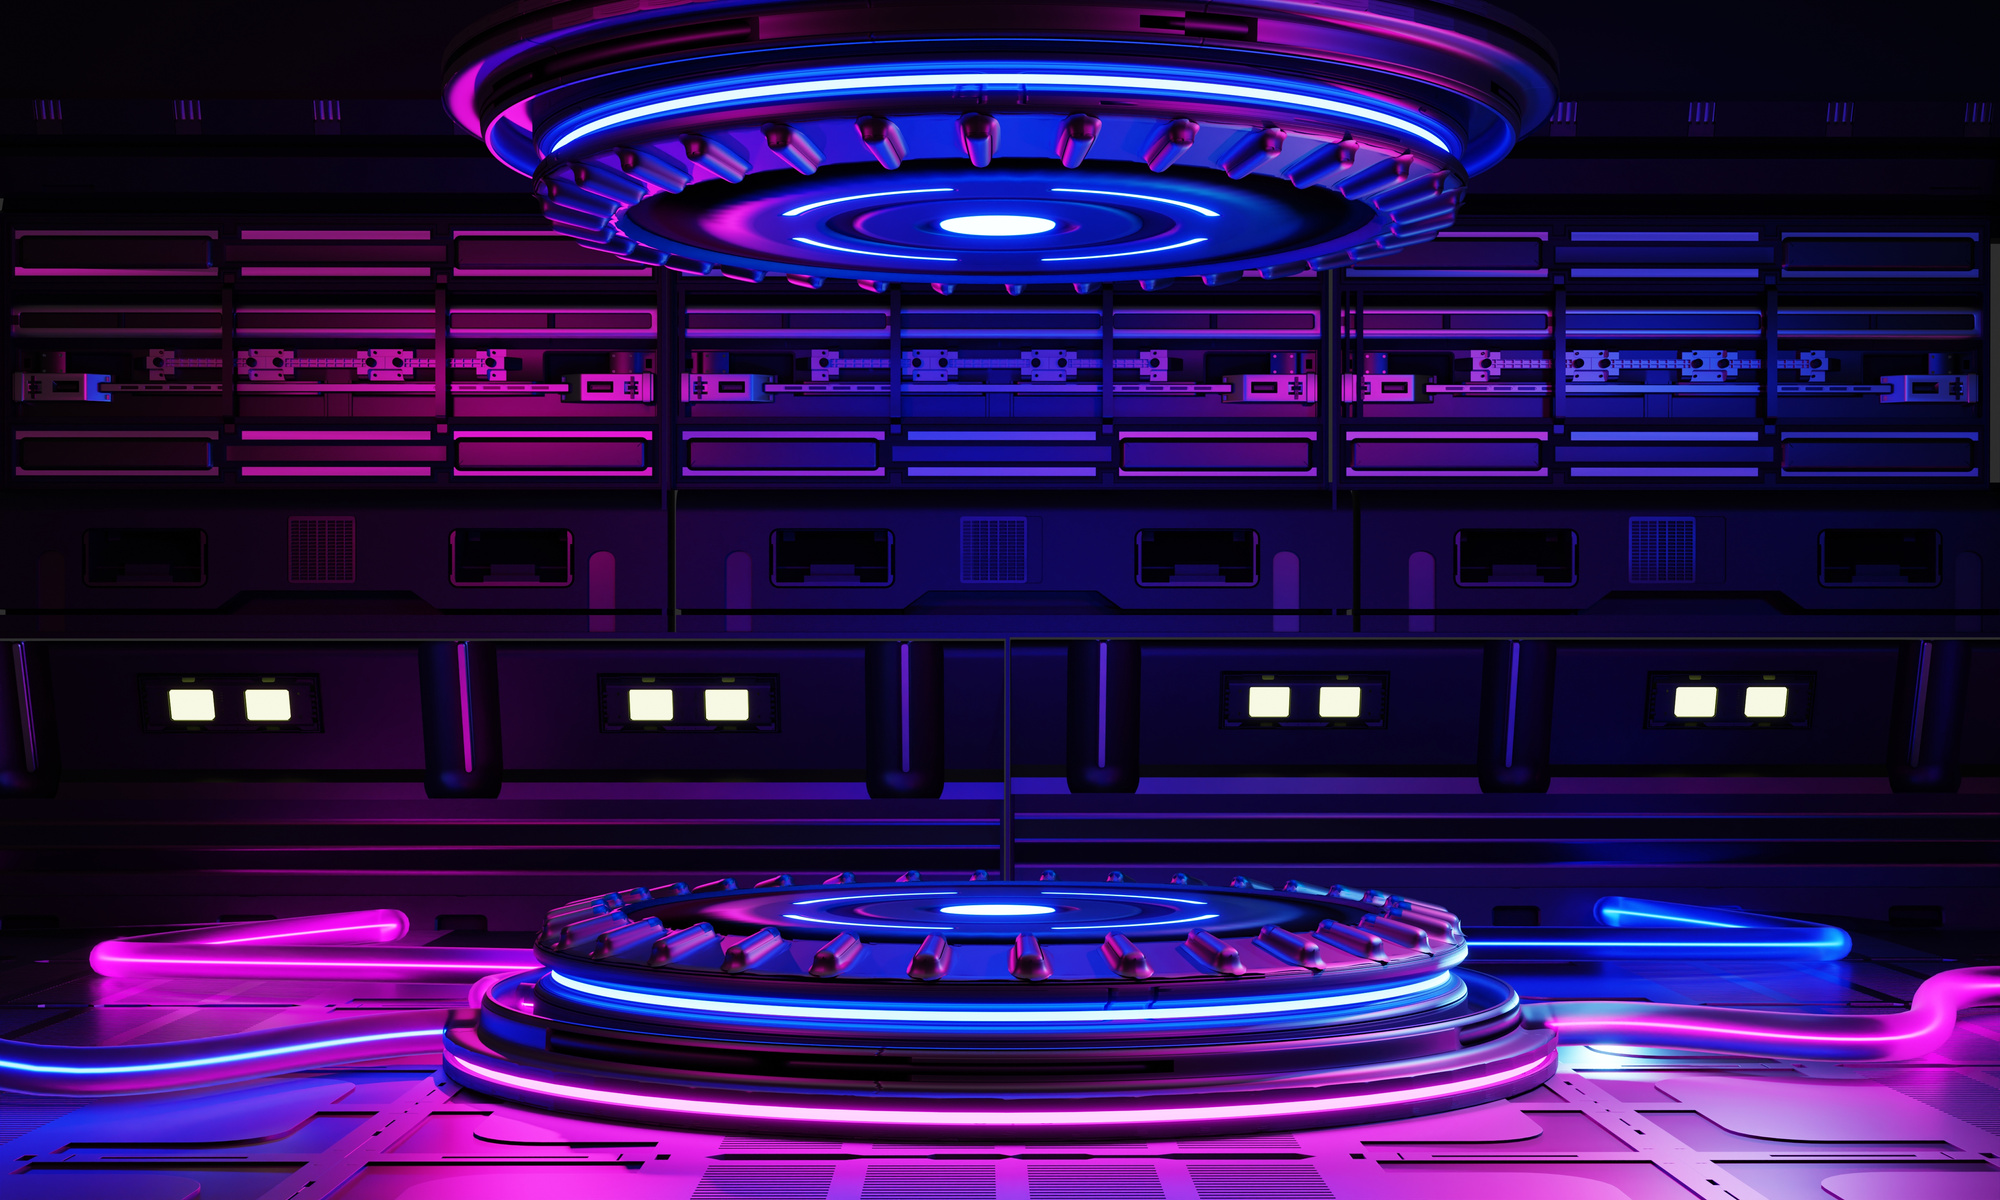 Cyberpunk Sci-Fi Product Podium Showcase in Spaceship Base with Blue and Pink Background. Technology and Object Concept. 3D Illustration Rendering